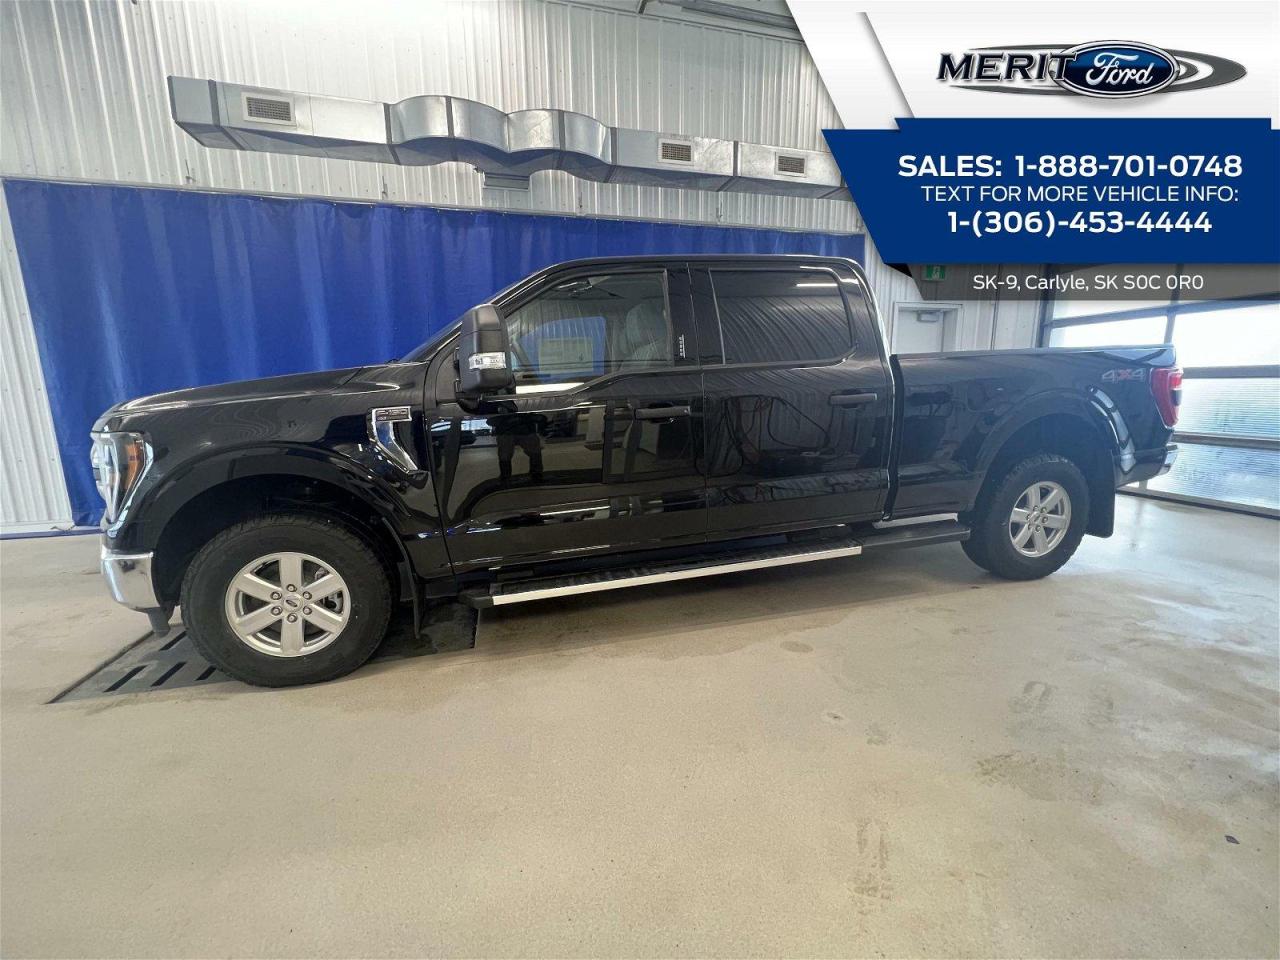 2023 Ford F-150 XLT Model Year Sale Event! Photo0